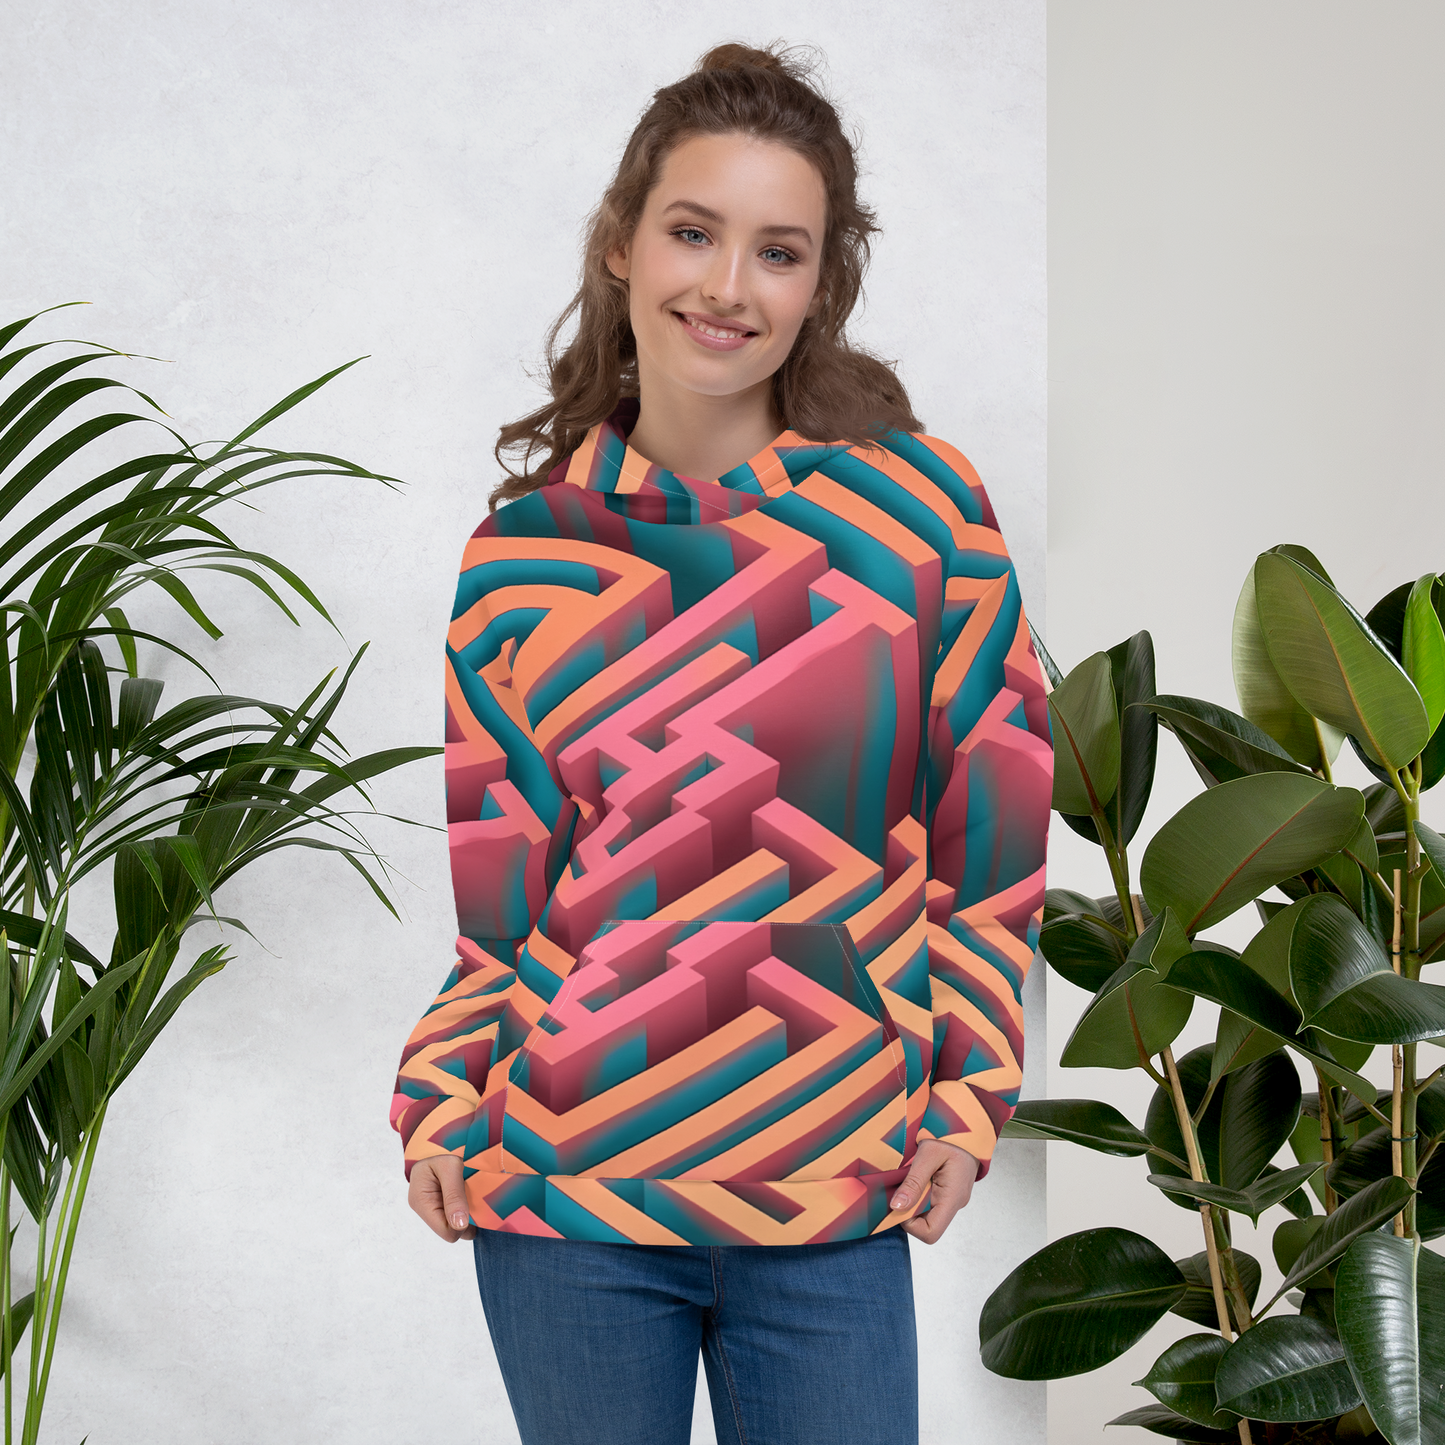 3D Maze Illusion | 3D Patterns | All-Over Print Unisex Hoodie - #1